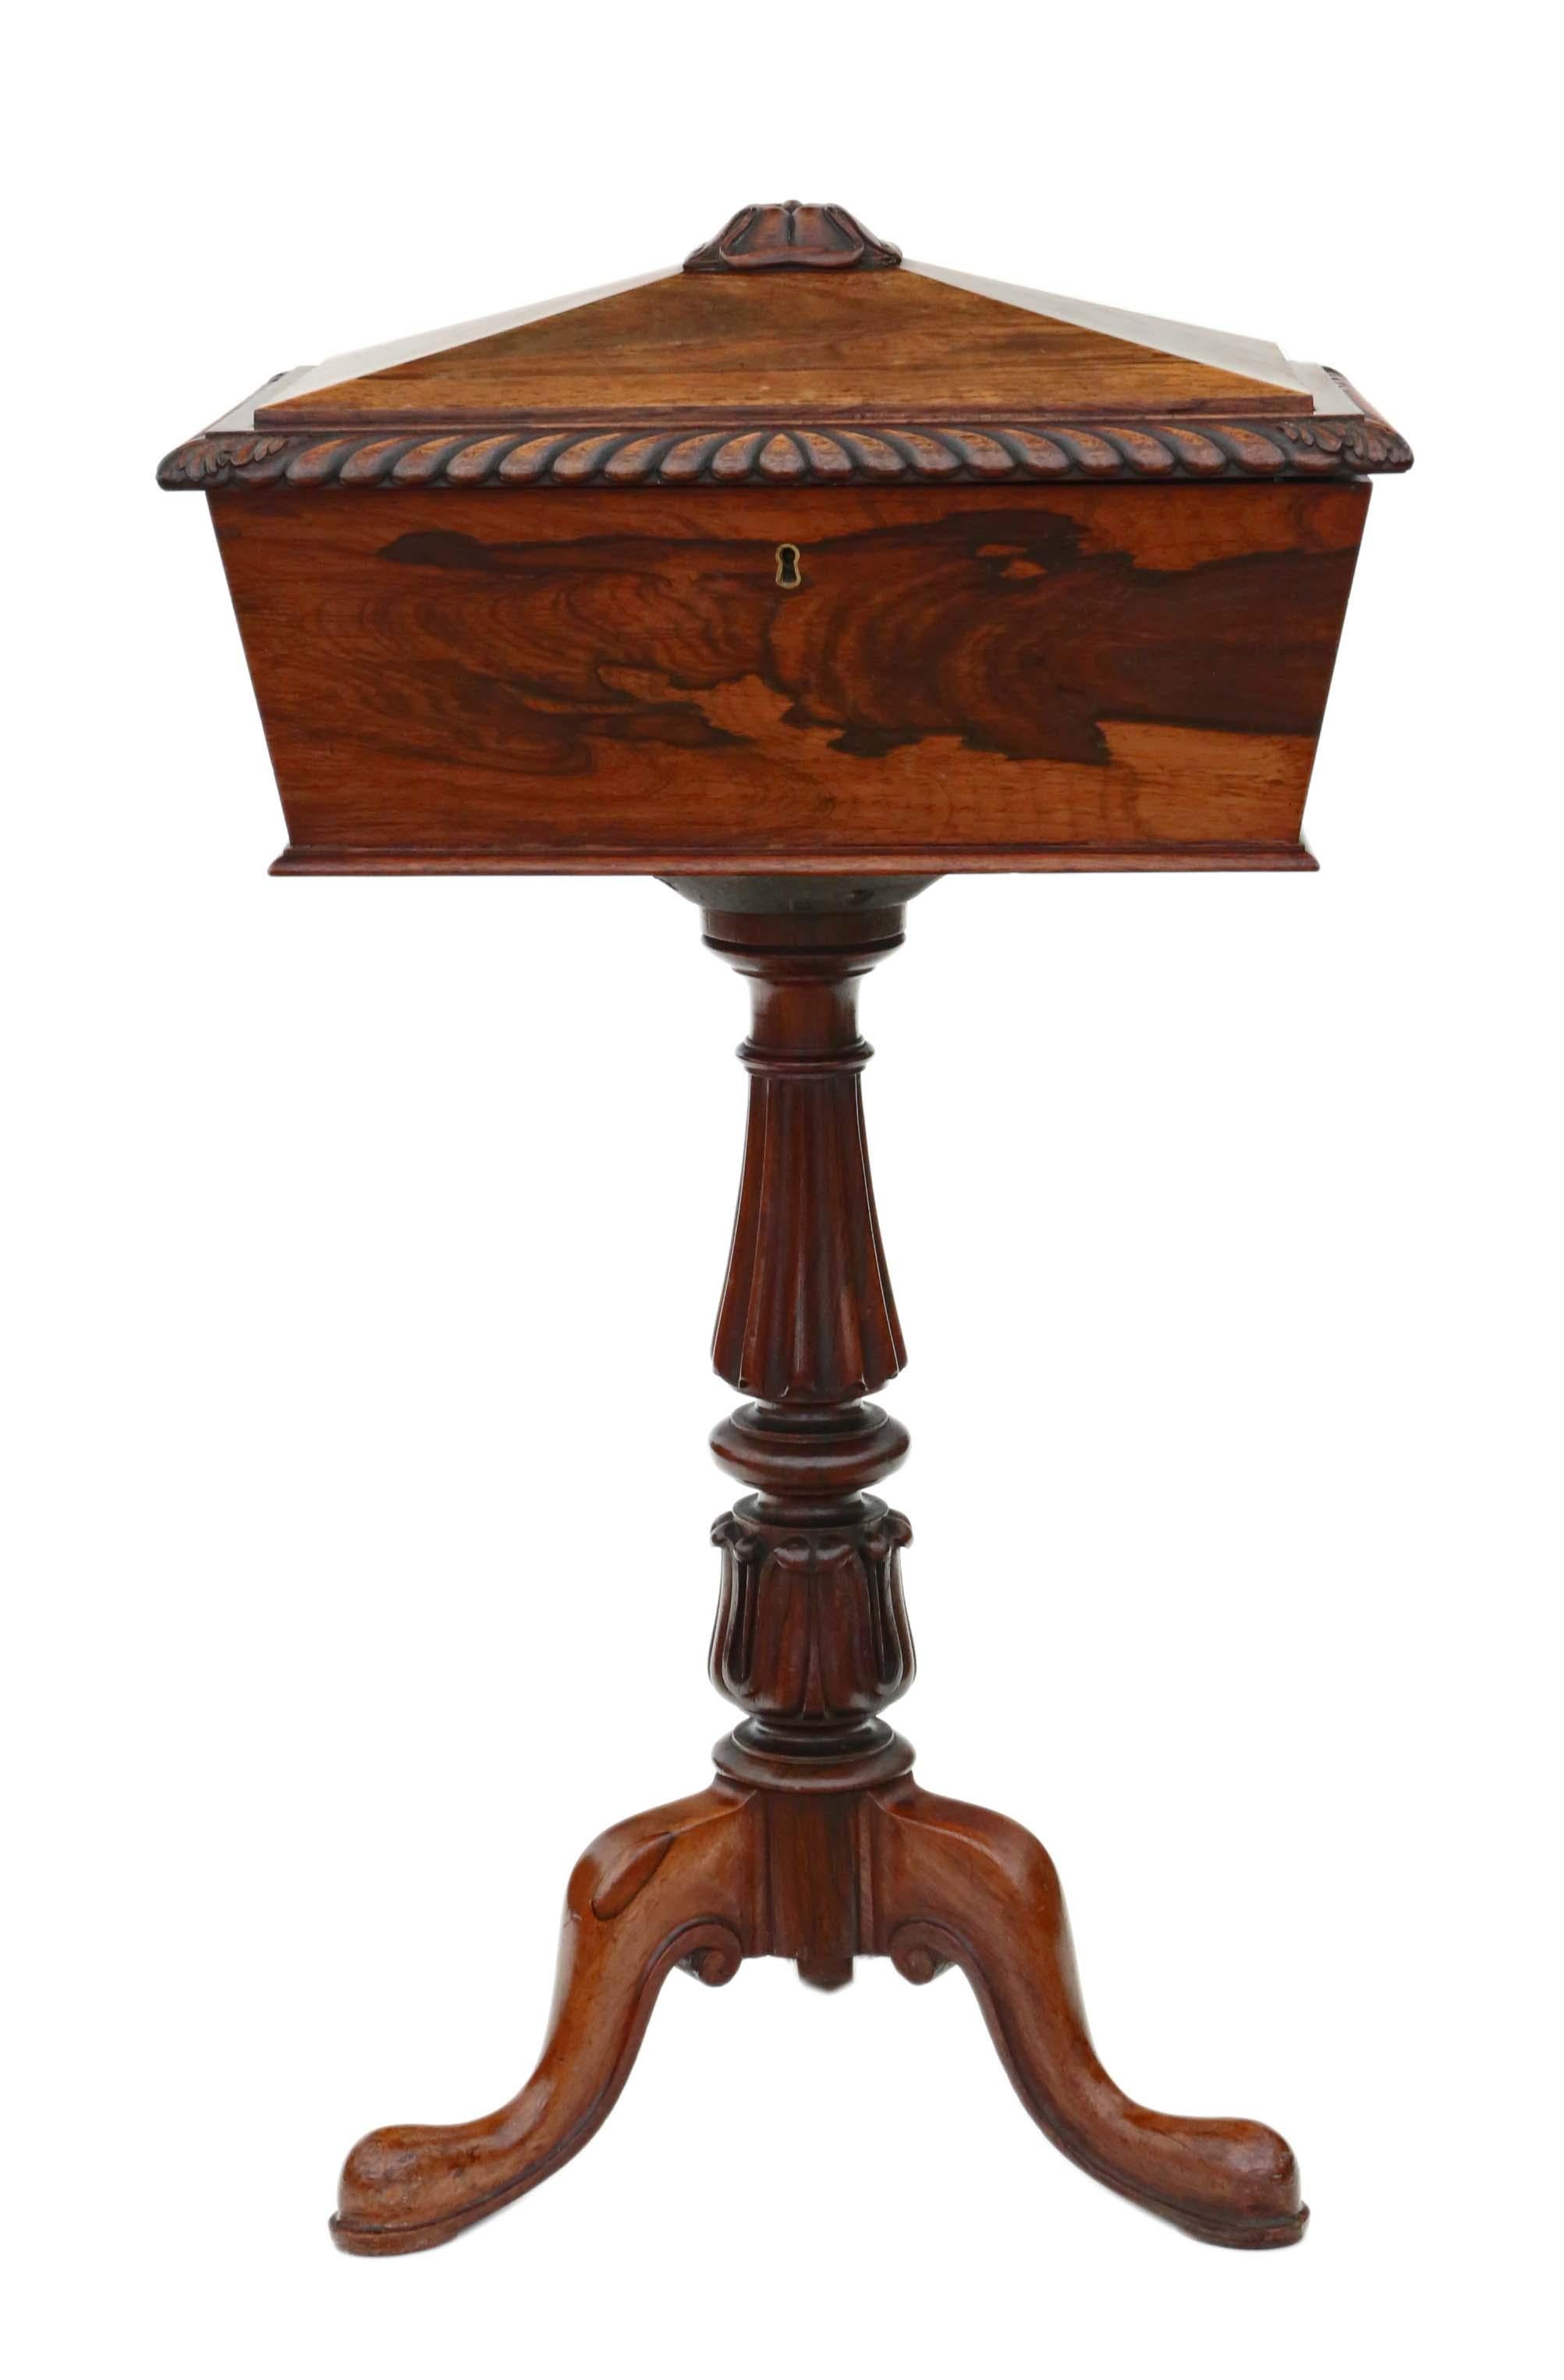 Antique quality Regency carved rosewood tea ploy, circa 1830.
A top quality piece in the manner of Gillows. A very rare find.
Solid, no loose joints and no woodworm.
Good size, color and proportions.
Measures: 49cm W x 35cm D x 85cm H.
Historic